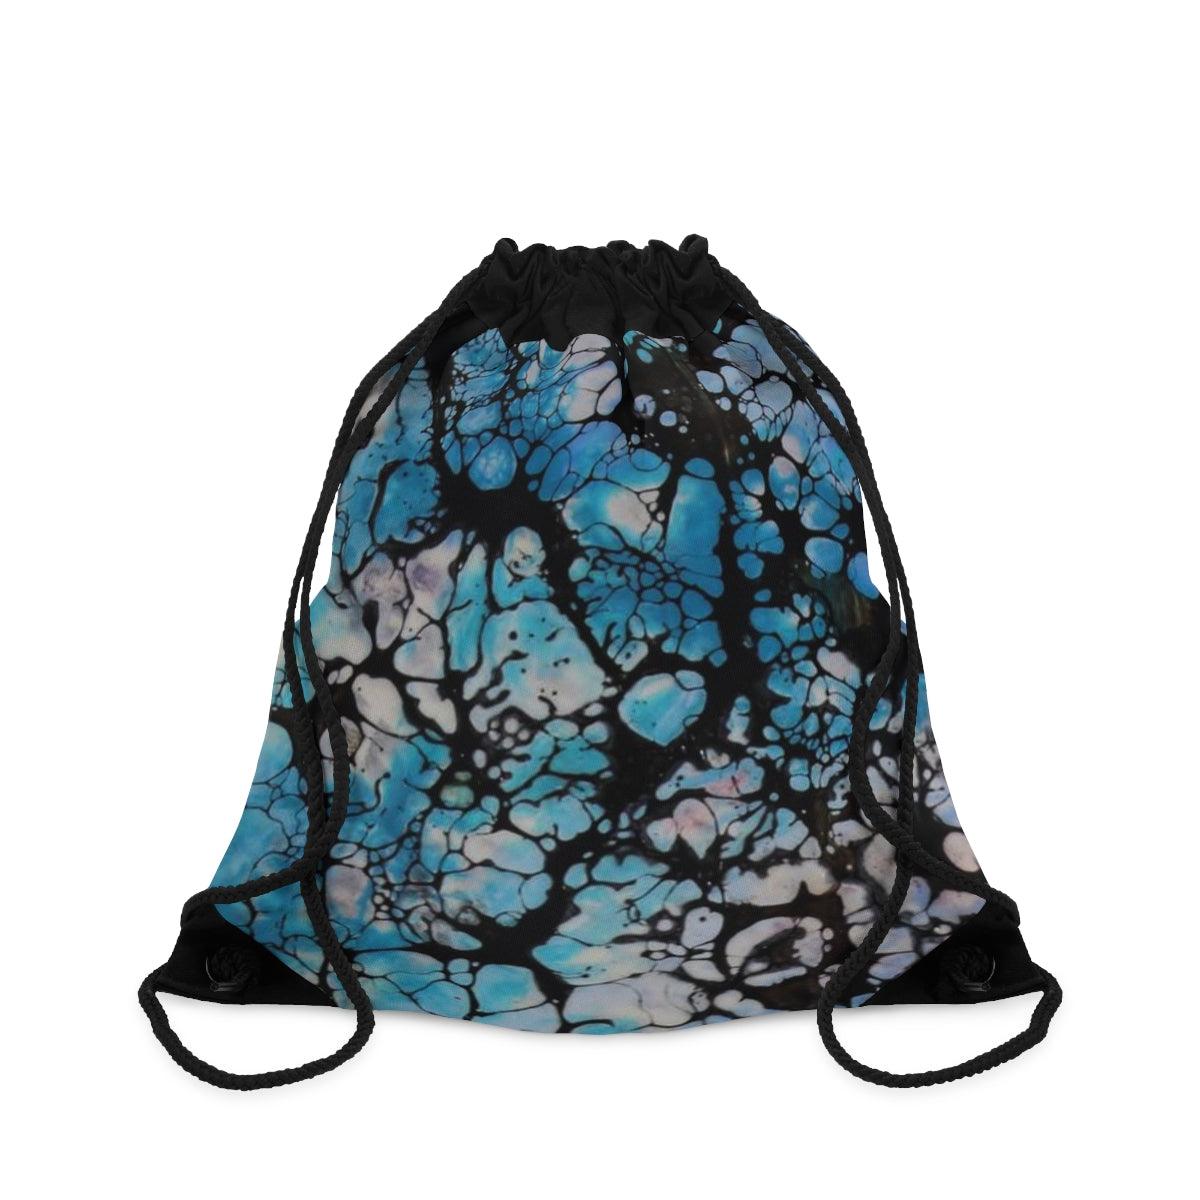 "Synapse" Drawstring Bag-Bags - Mike Giannella - Encaustic Painting - Mixed Media Artist - Art Prints